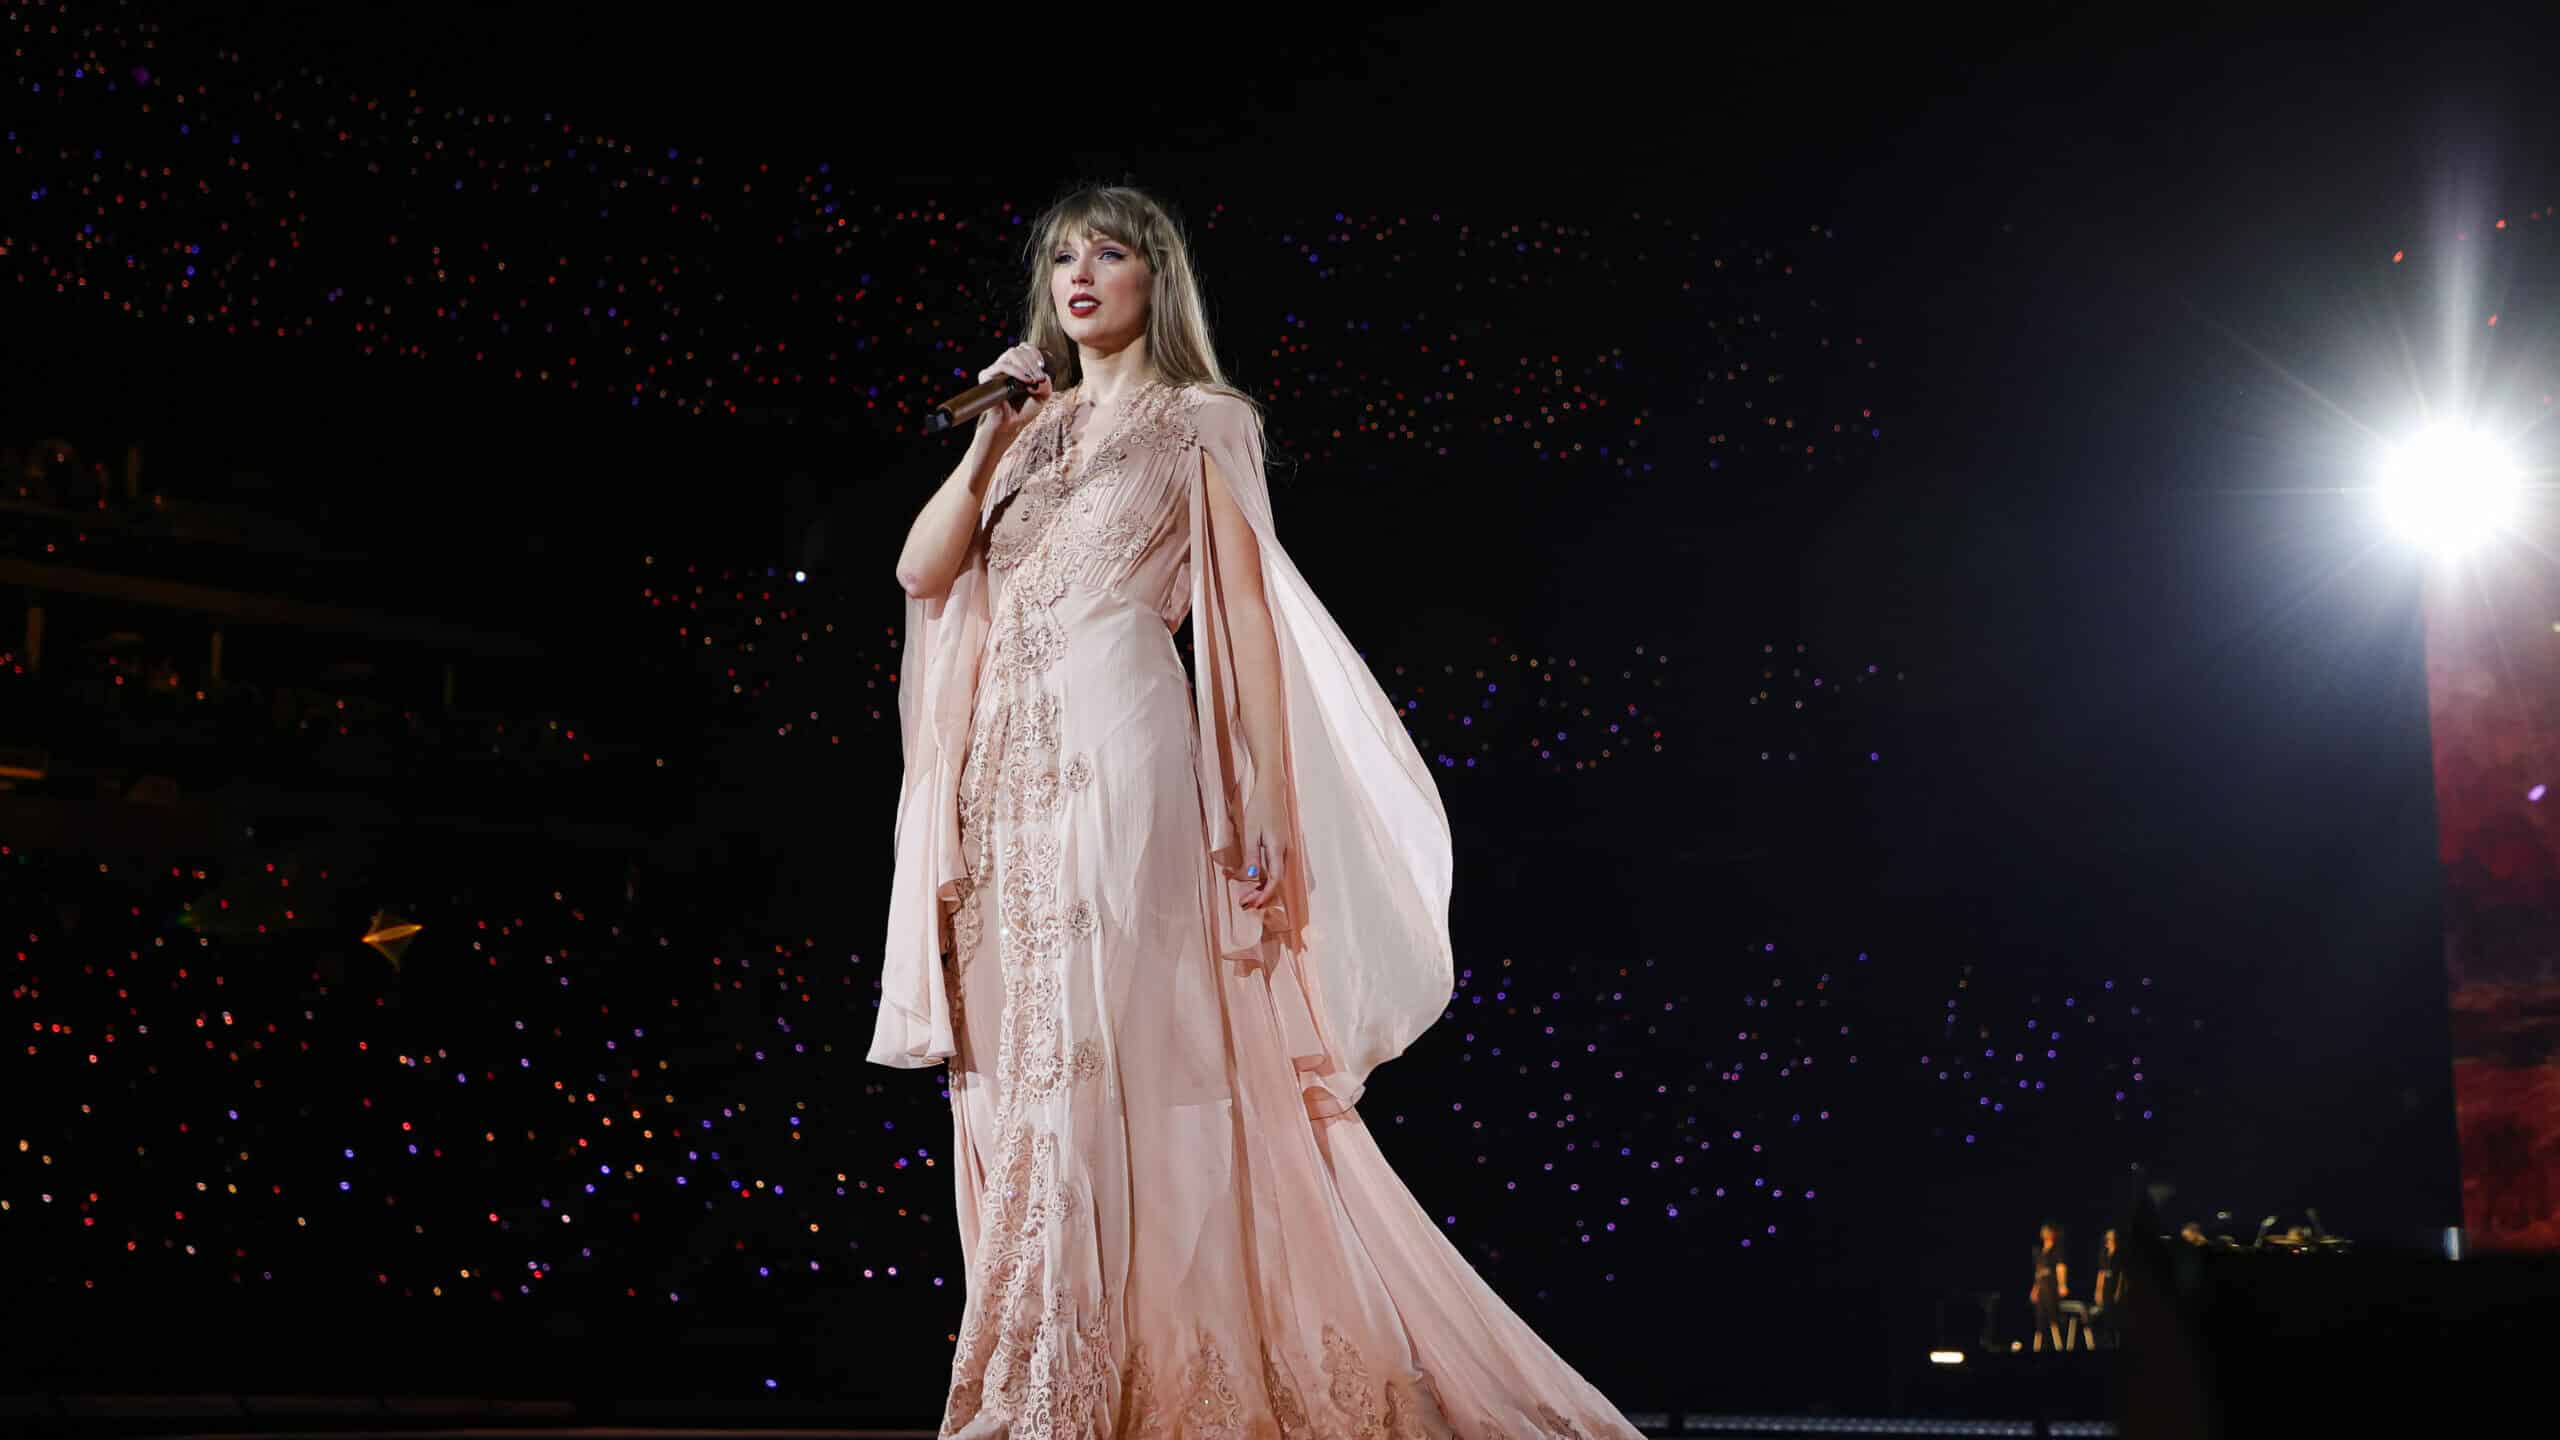 Taylor Swift performs onstage during the "Taylor Swift | The Eras Tour" at Allegiant Stadium on March 24, 2023 in Las Vegas, Nevada. (Photo by Ethan Miller/TAS23/Getty Images for TAS Rights Management)